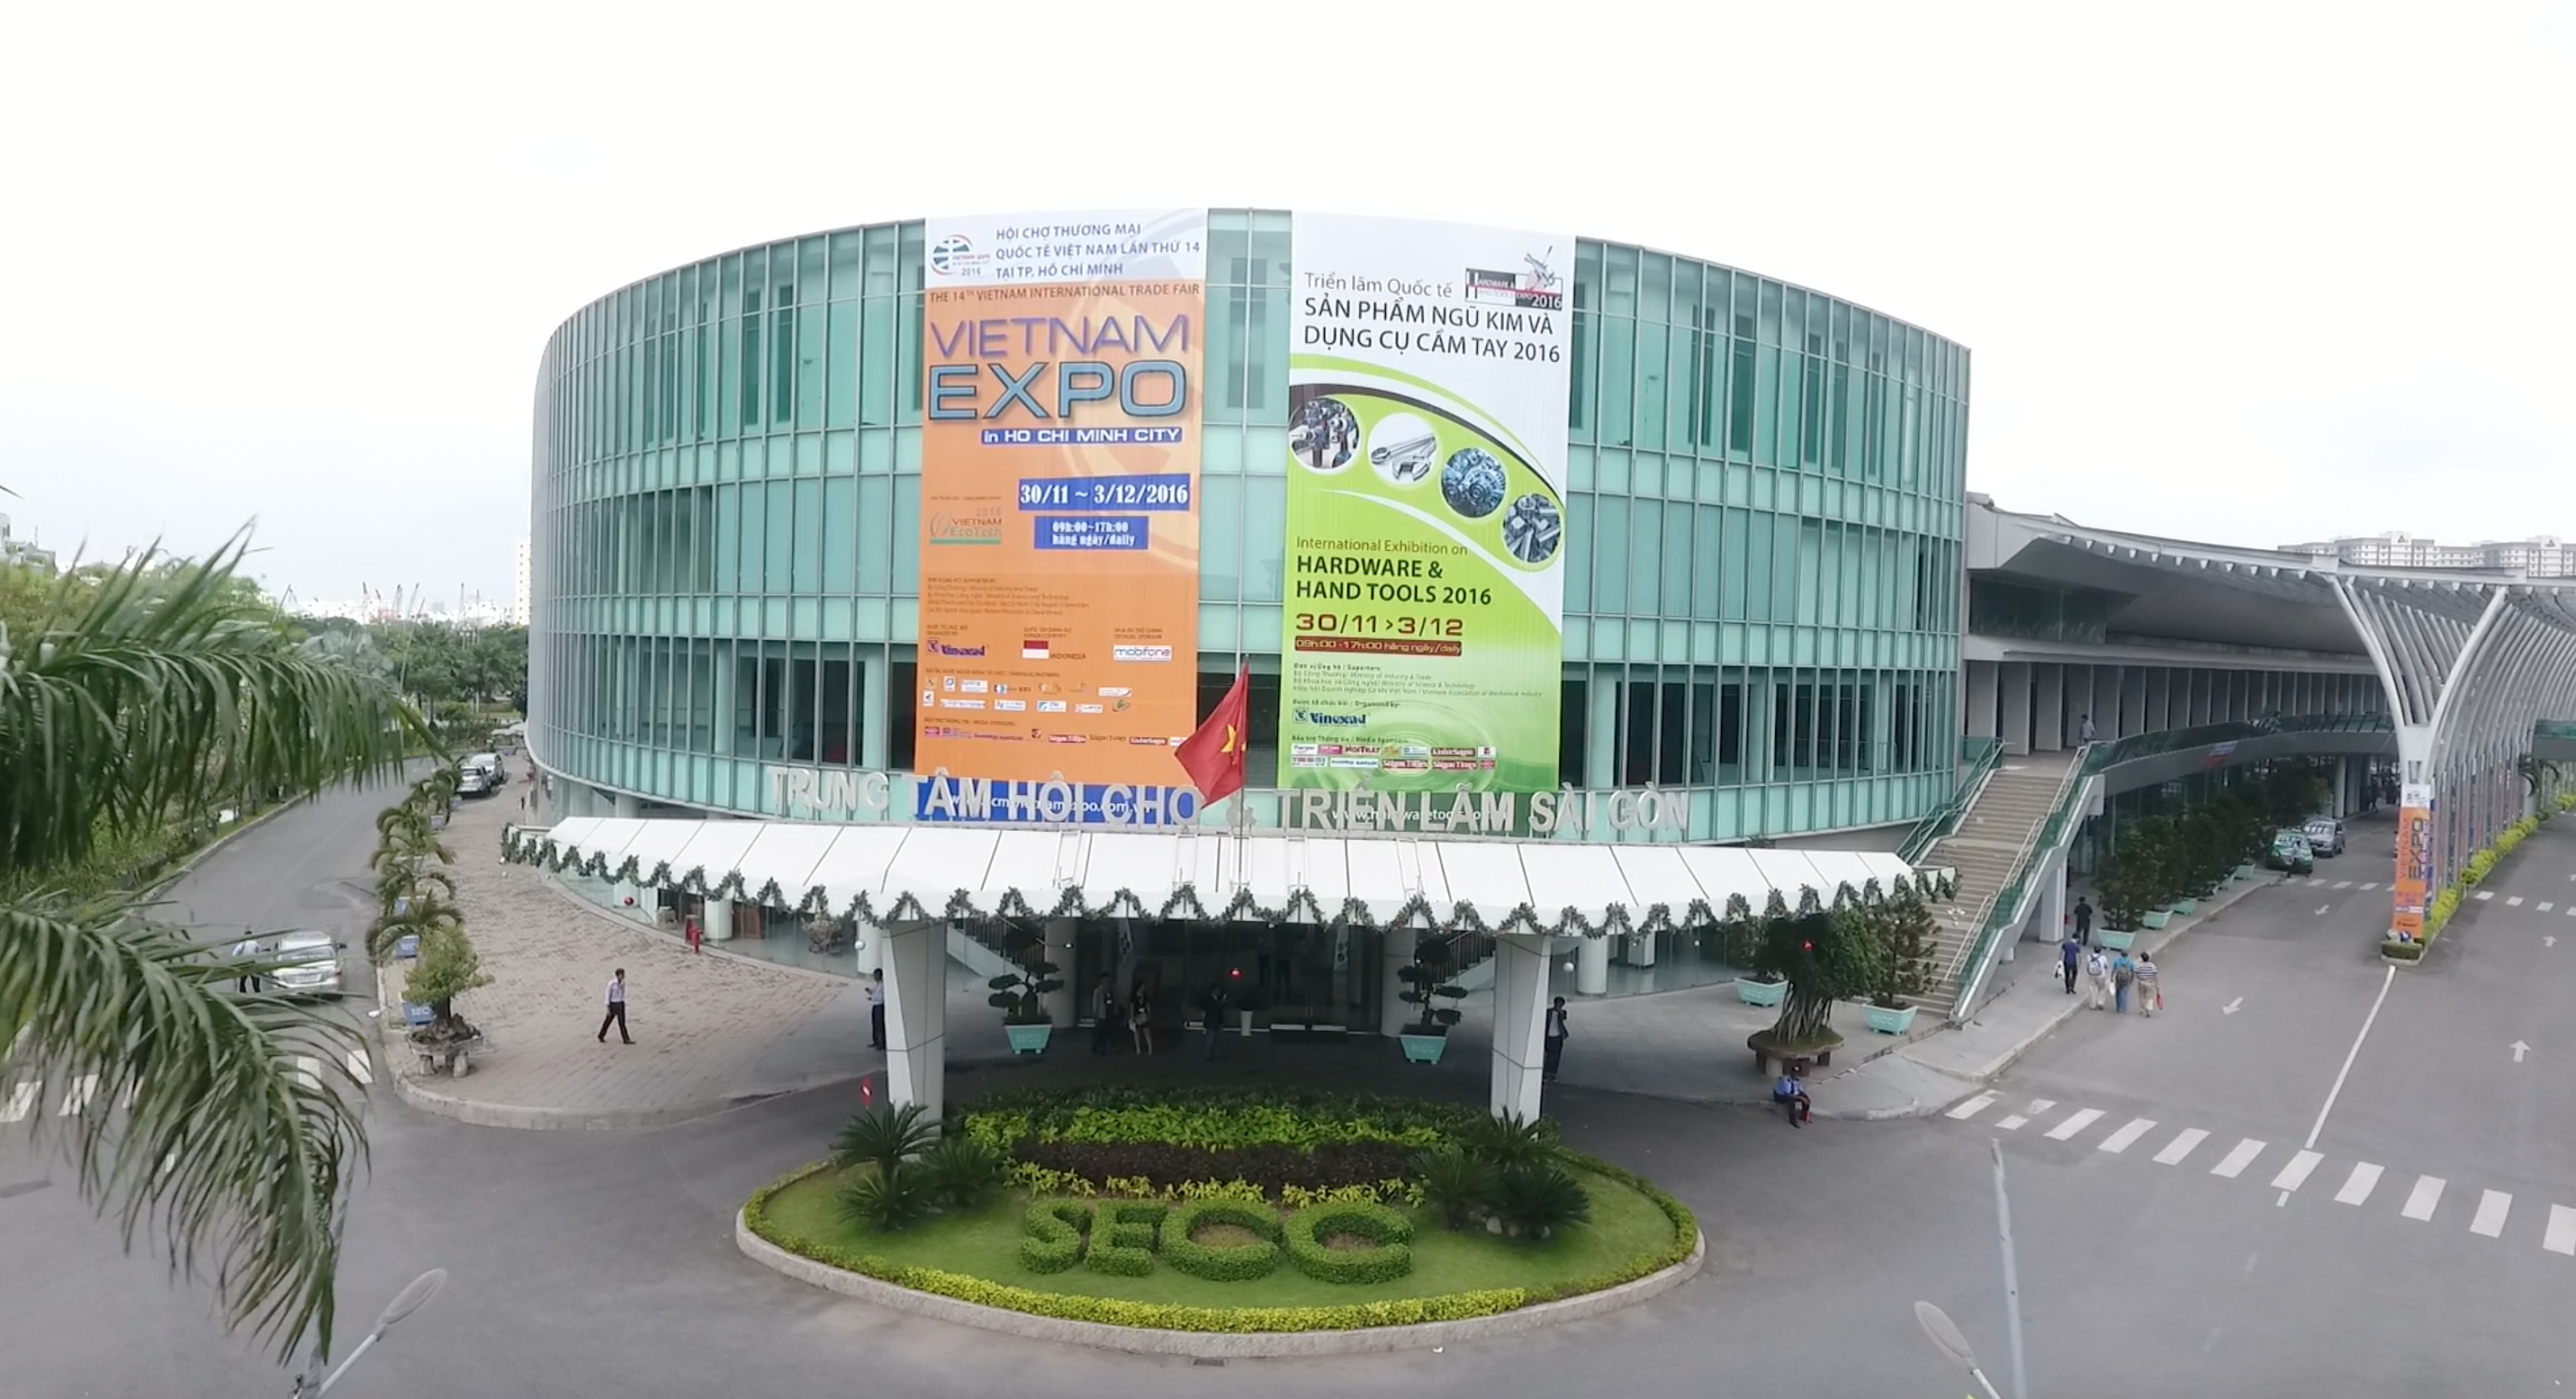 Vietnam Expo 2017: the land of business opportunities